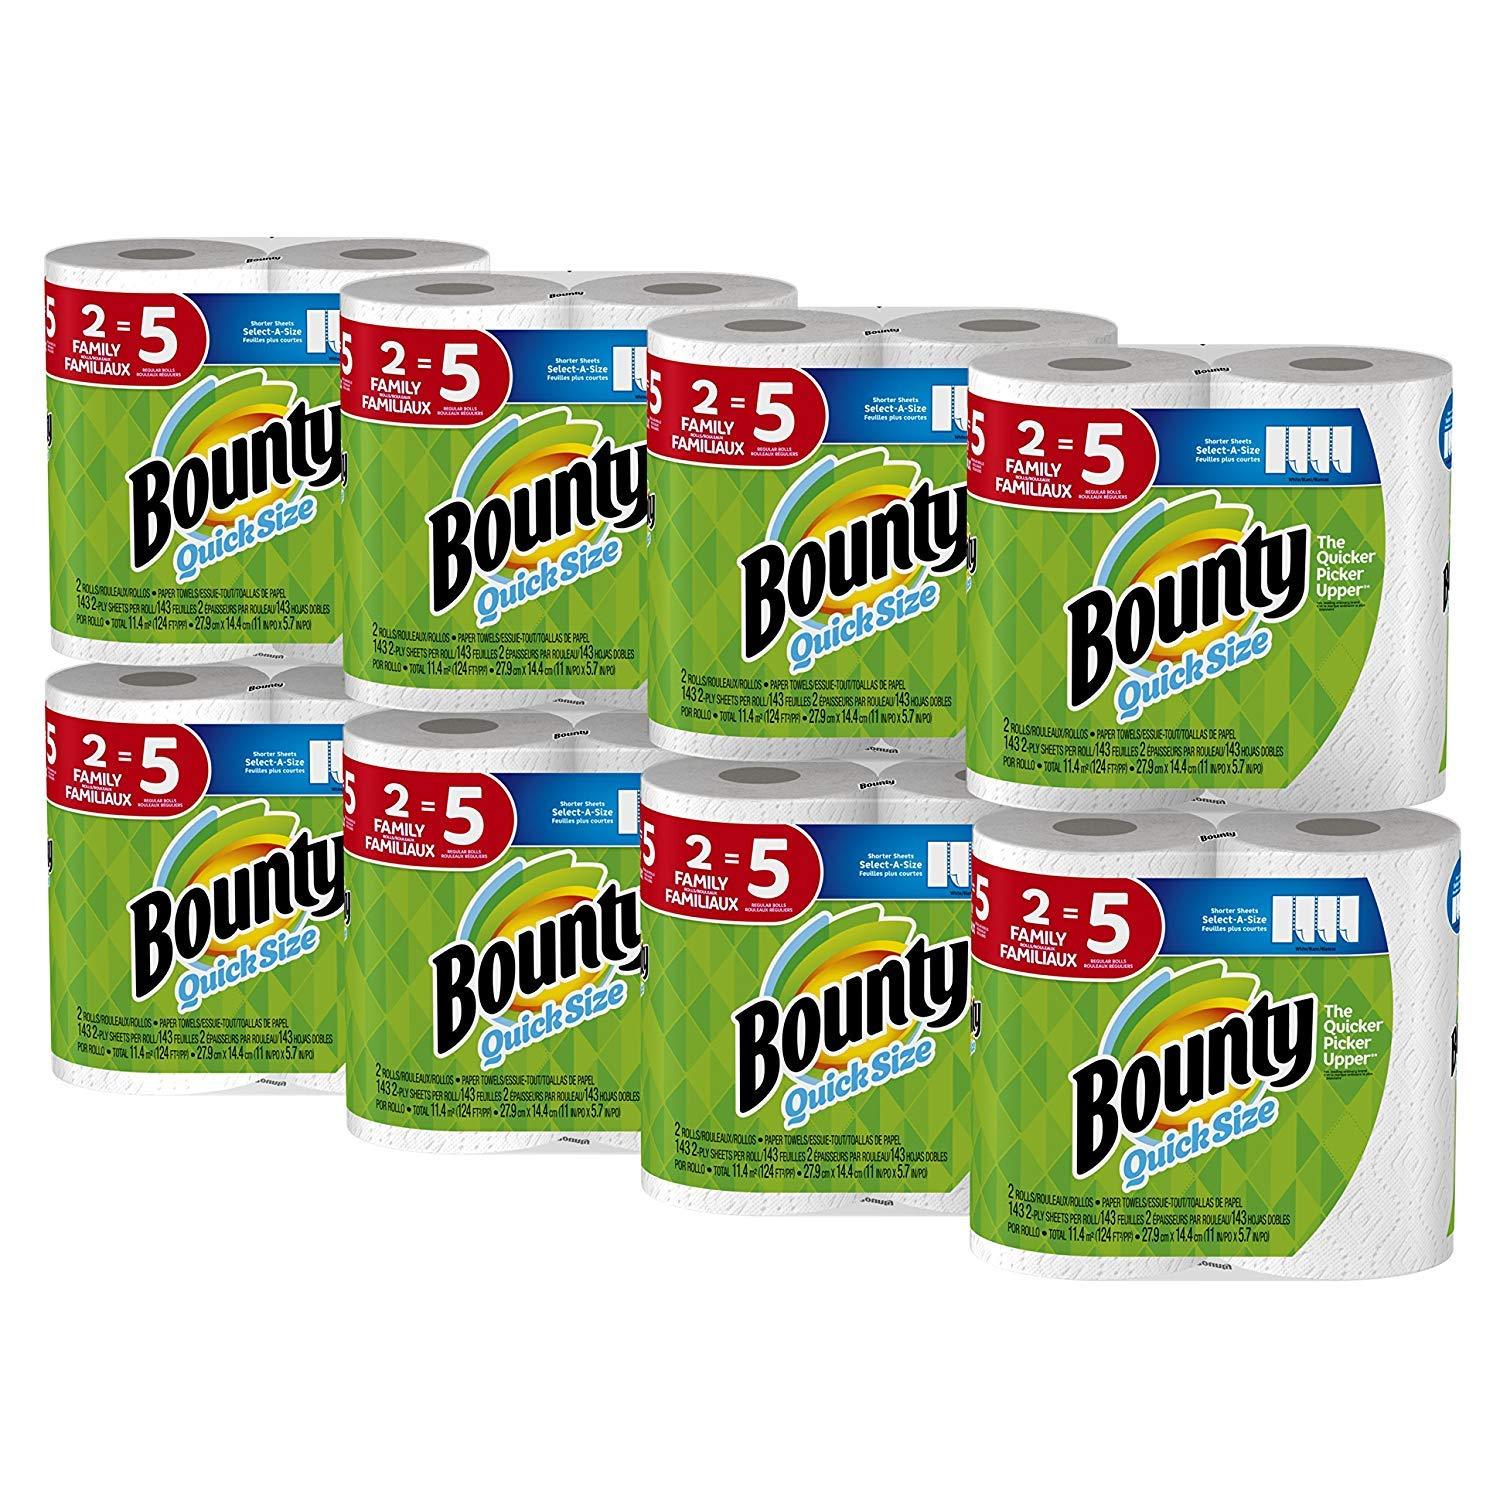 Bounty Quick-Size Paper Towels, White, Family Rolls, 16 Count (Equal to 40 Regular Rolls)